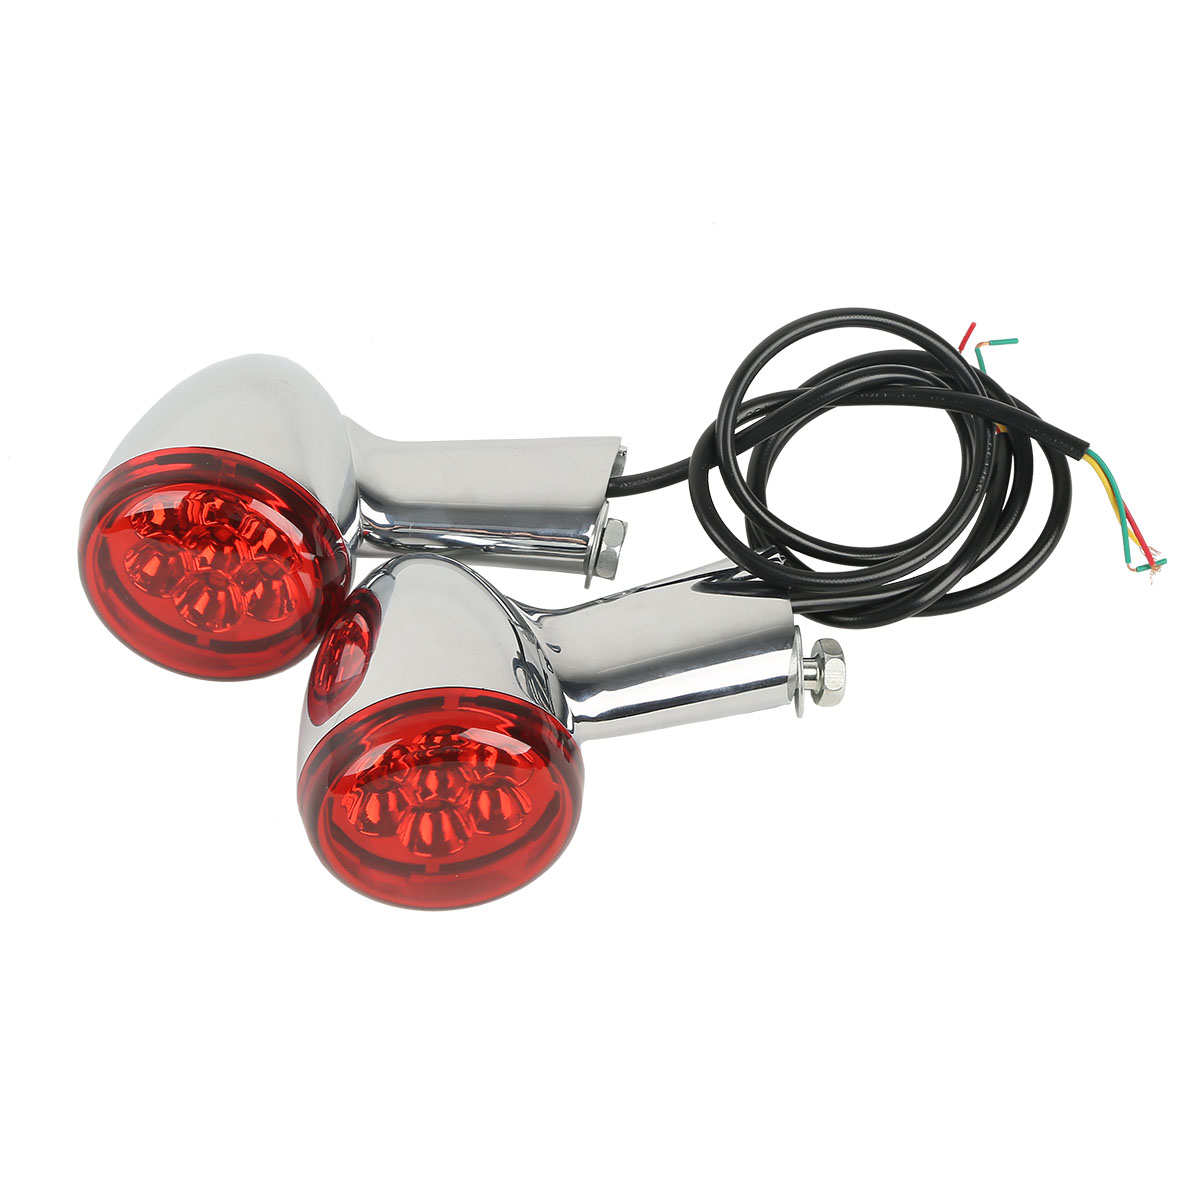 Benlari 2 3 1/4 LED 1157 Front Rear Turn Signal Lights Compatible for Harley Sportster Touring Softail Dyna Street Electra Glide Fatboy XL 2011-2021 